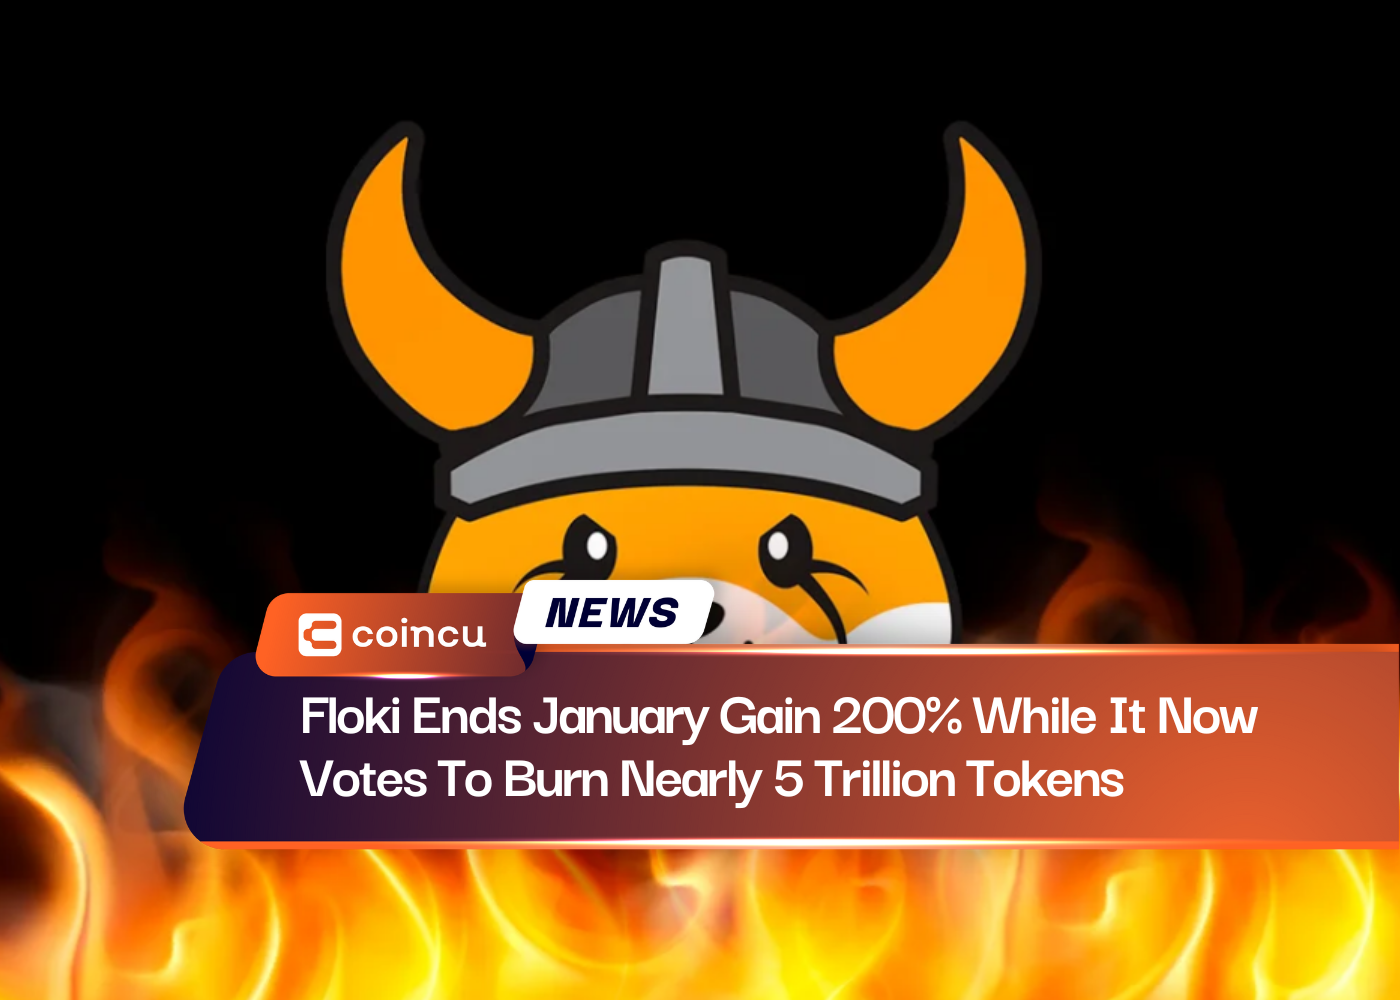 Floki Ends January Gain 200% While It Now Votes To Burn Nearly 5 Trillion Tokens